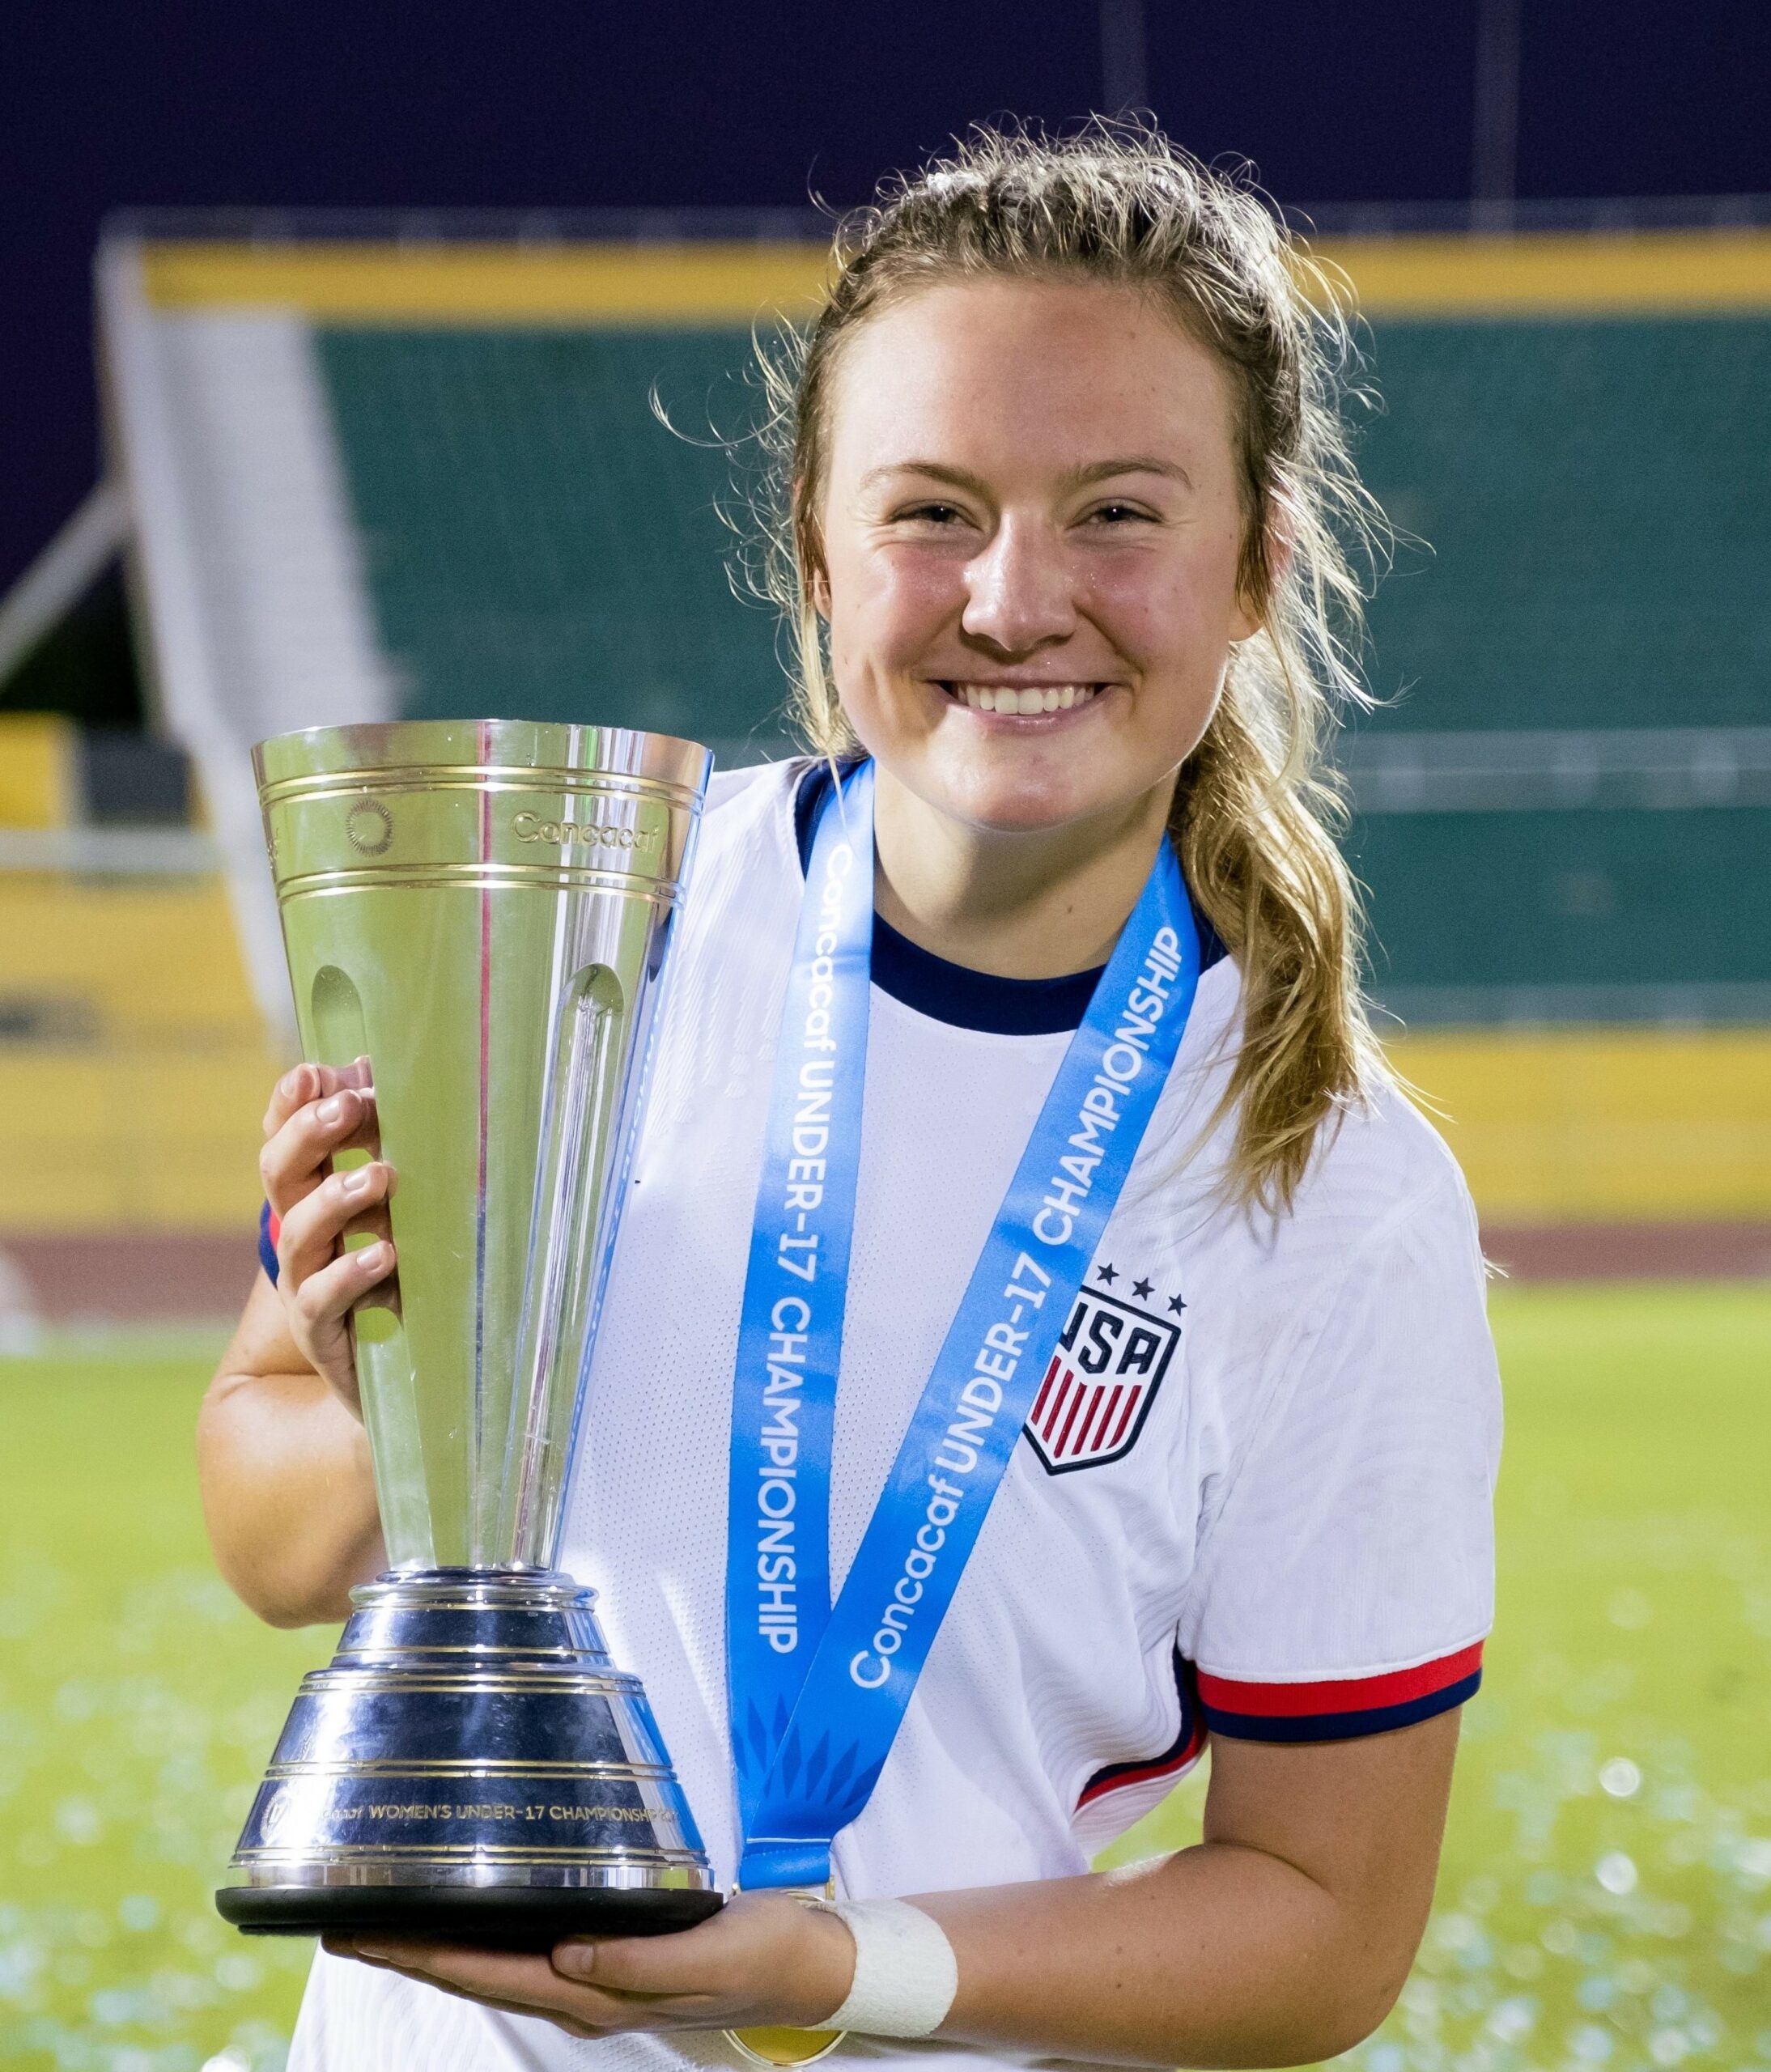 Cameron Roller holds the Concacaf U17 Championships trophy. (Courtesy US Soccer)